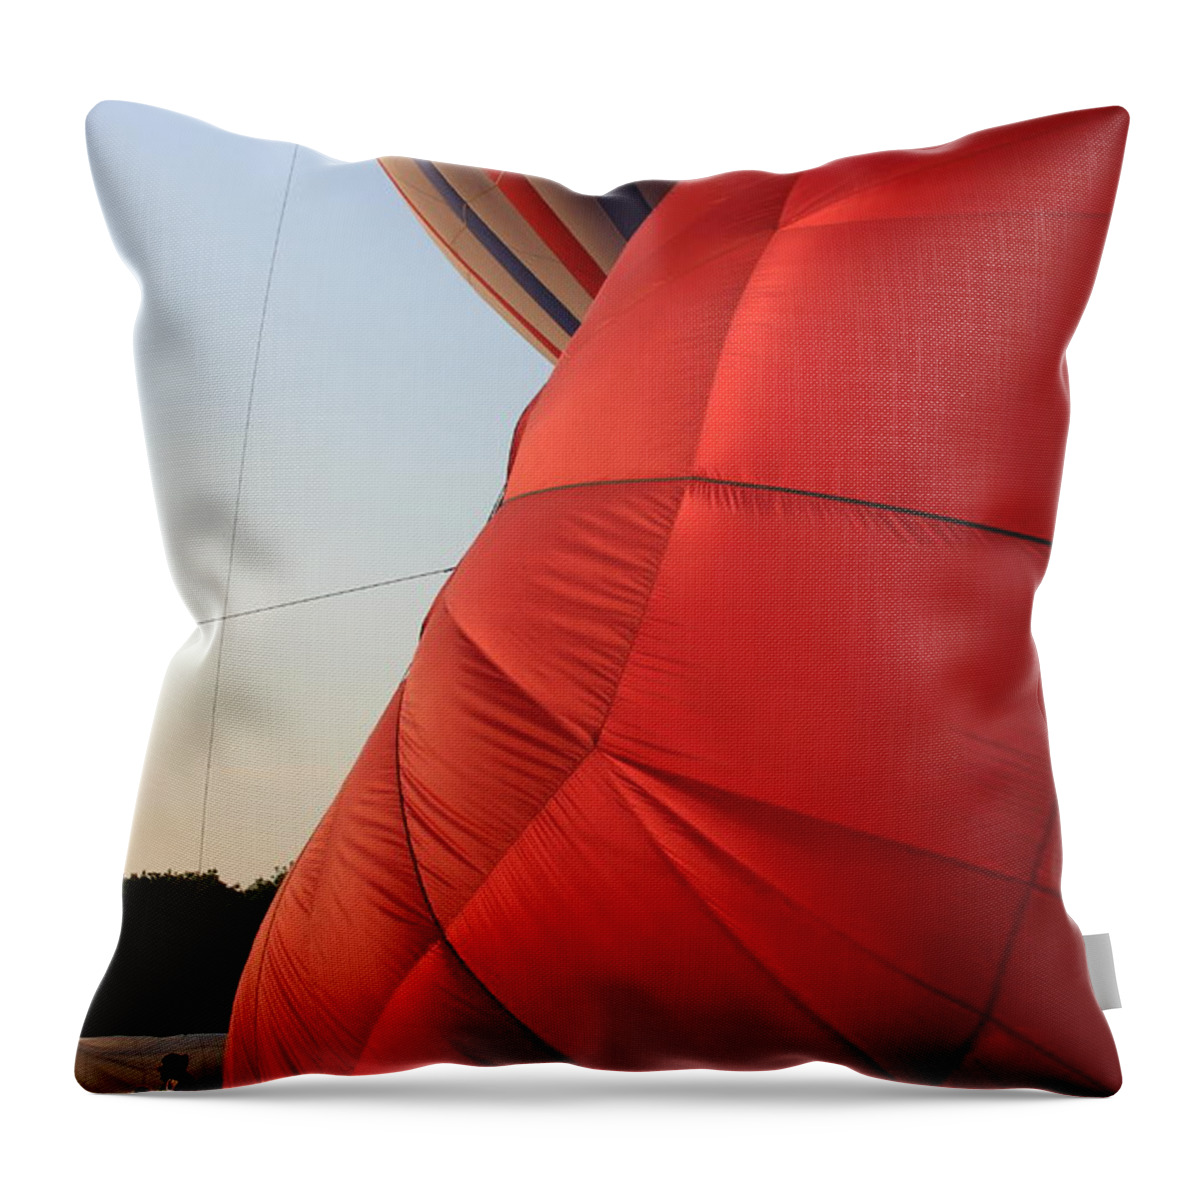 Hot Air Balloon Throw Pillow featuring the photograph A Sense of Scale by Lyle Hatch